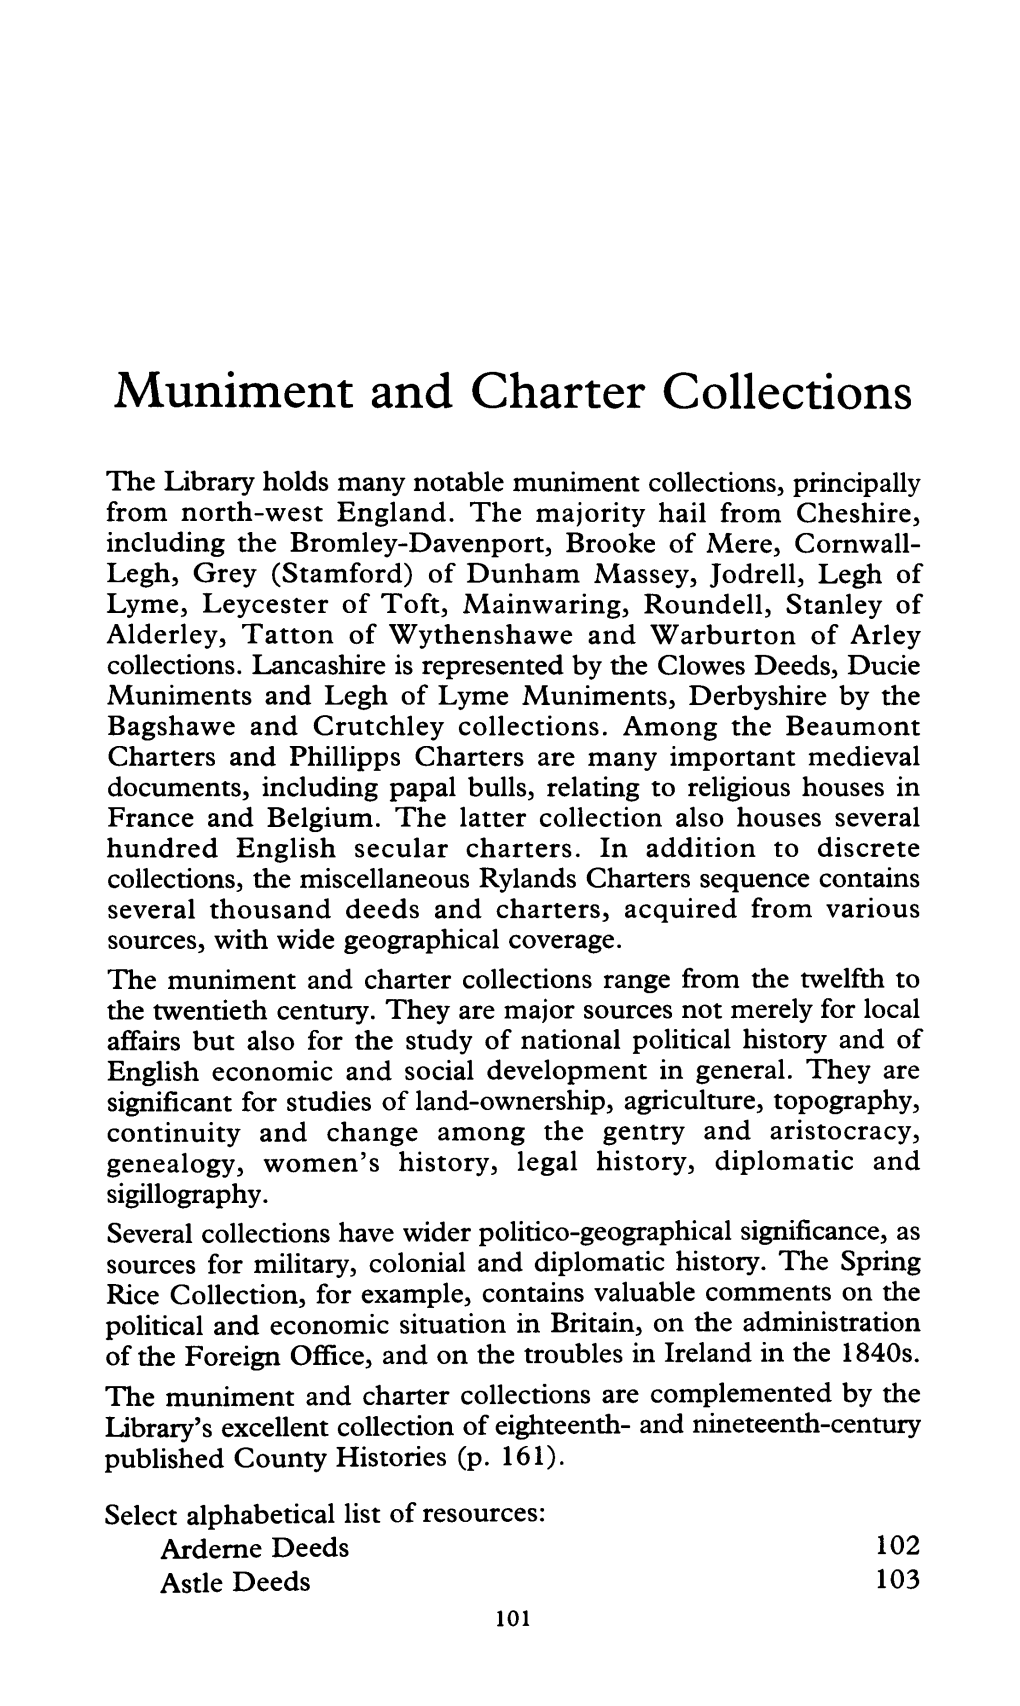 Muniment and Charter Collections